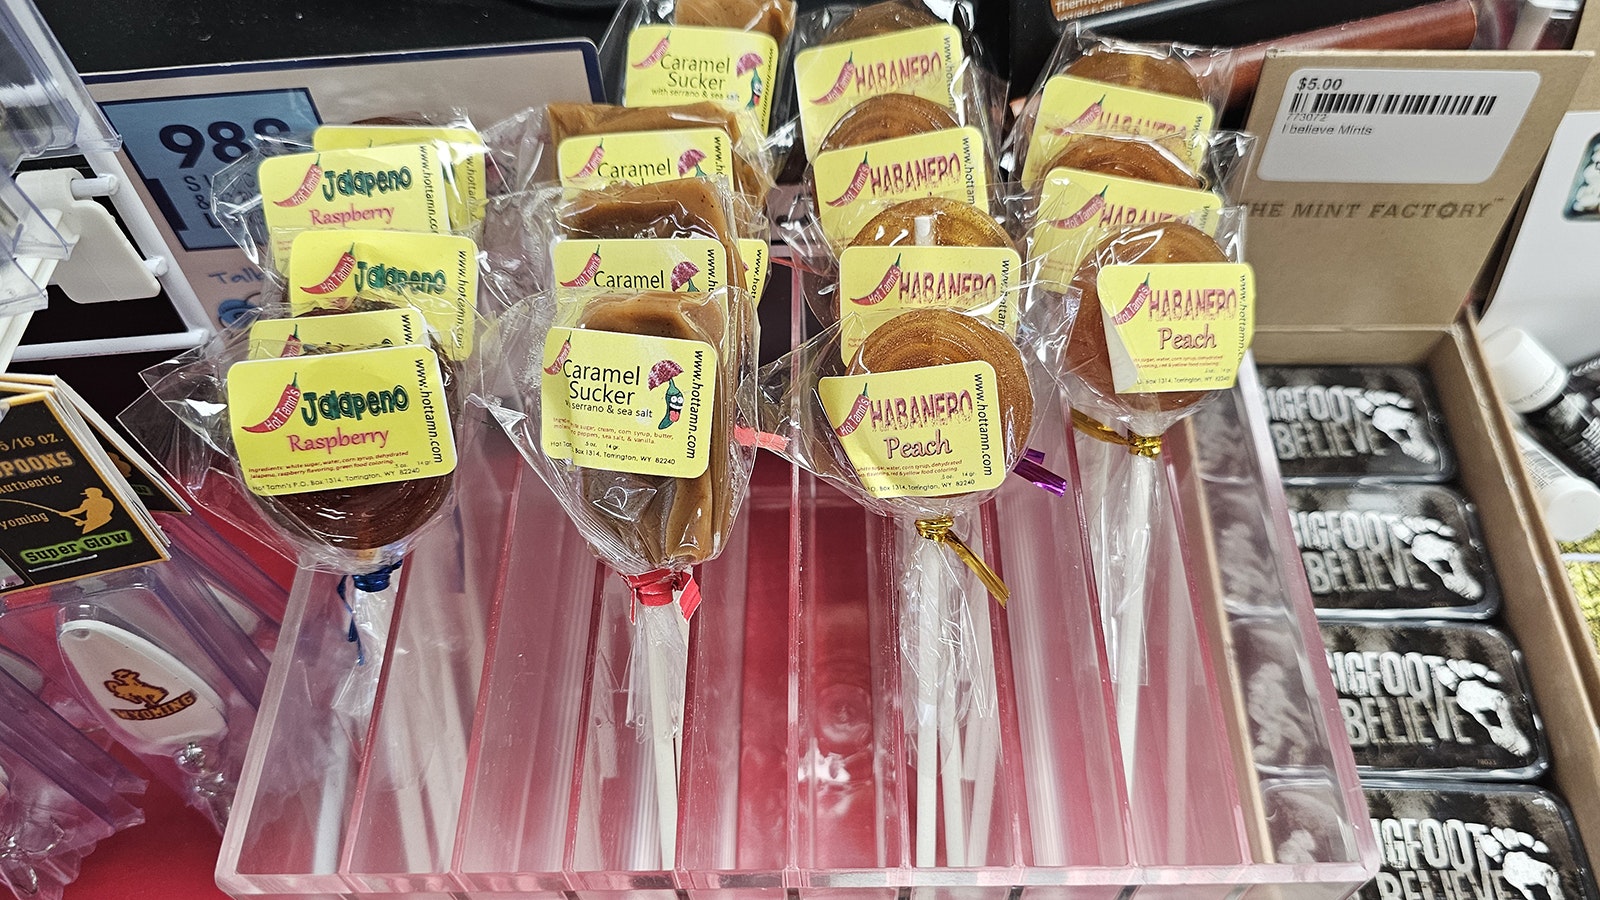 Hot and sweet candies made in Torrington.